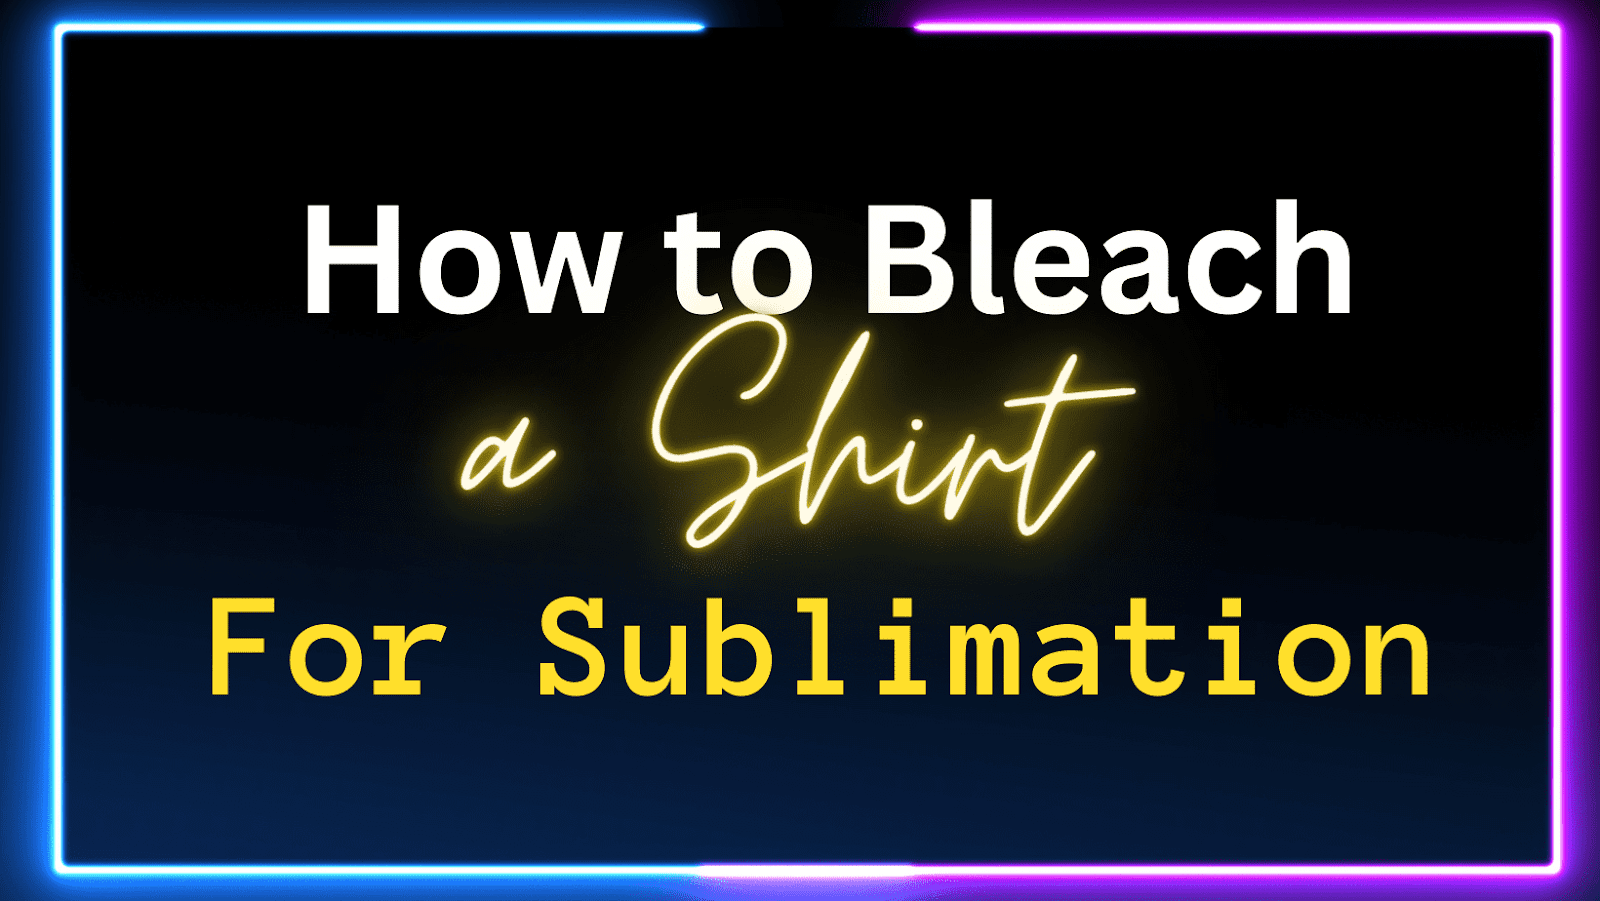 How To Bleach A Shirt For Sublimation